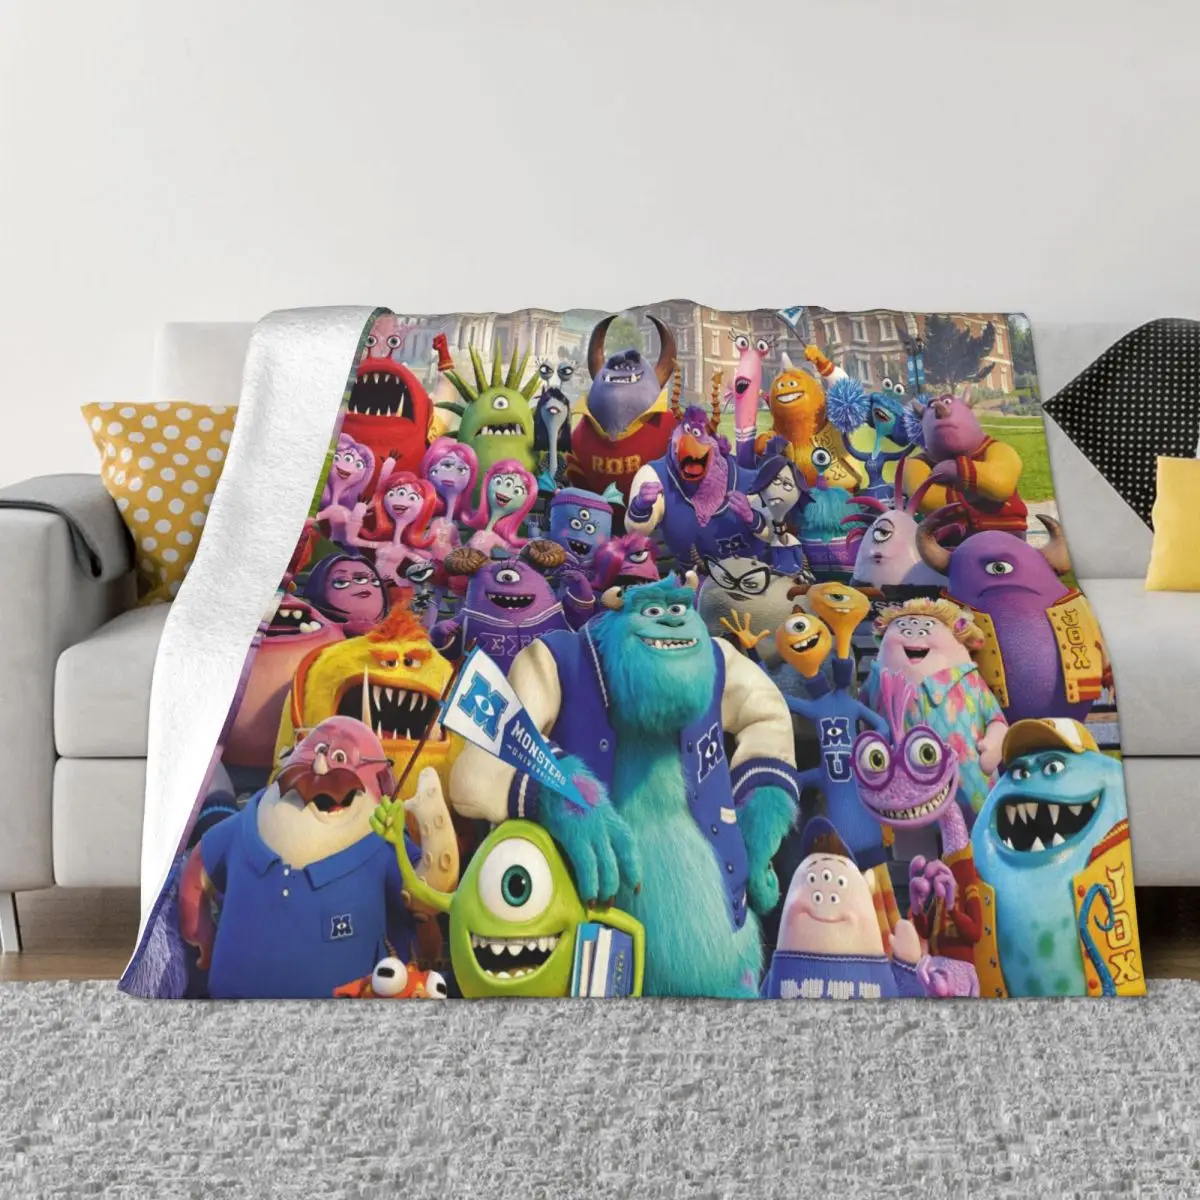 

Monster Cartoon Blankets Coral Fleece Plush All Season Movie Multi-function Super Warm Throw Blanket for Home Couch Bedspreads